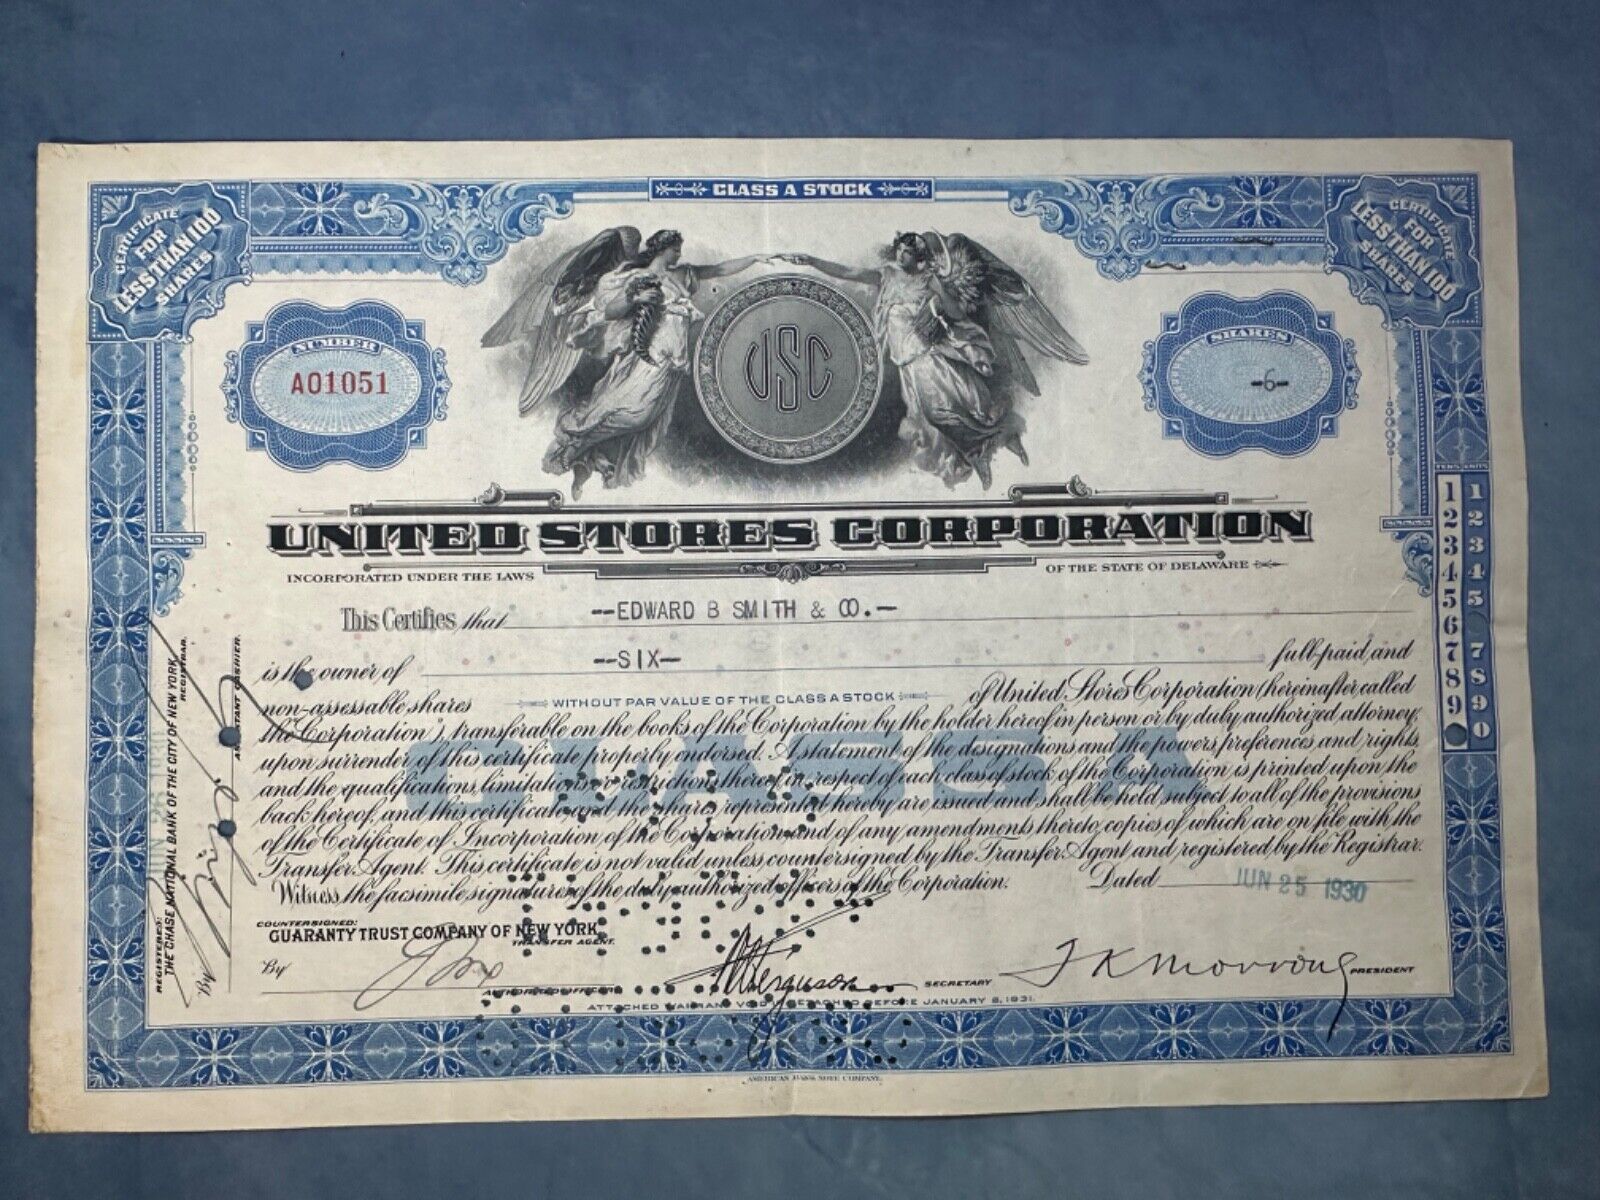 Vintage 1930 United Stores Corporation Class A Stock Certificate - Rare